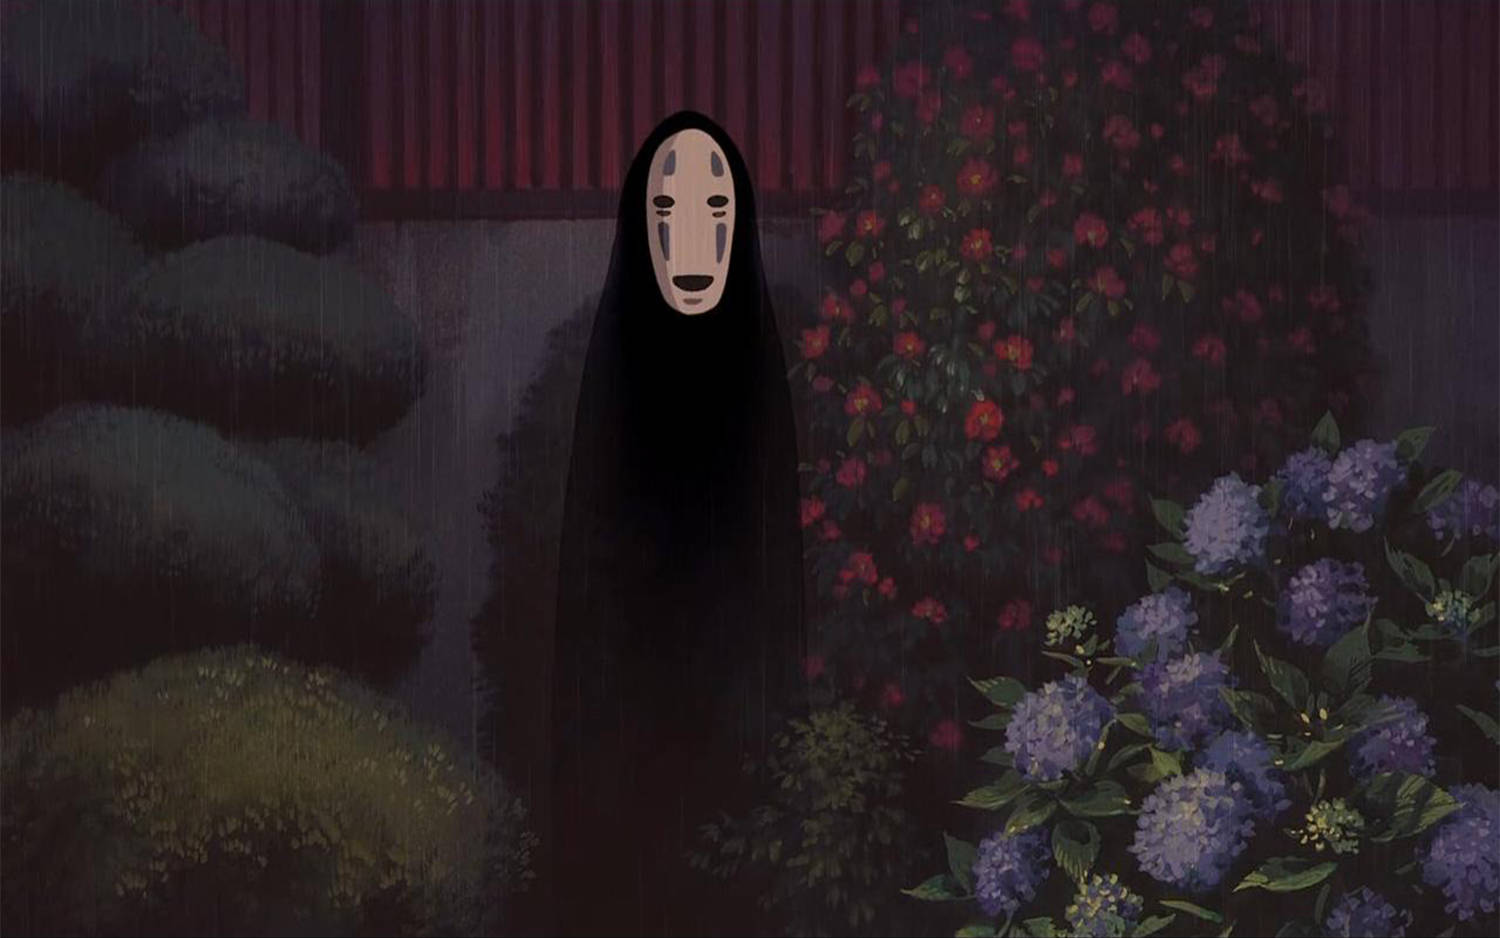 A Picturesque Garden With A Prominent No-face Figure From The Popular Animated Film, Spirited Away. Background